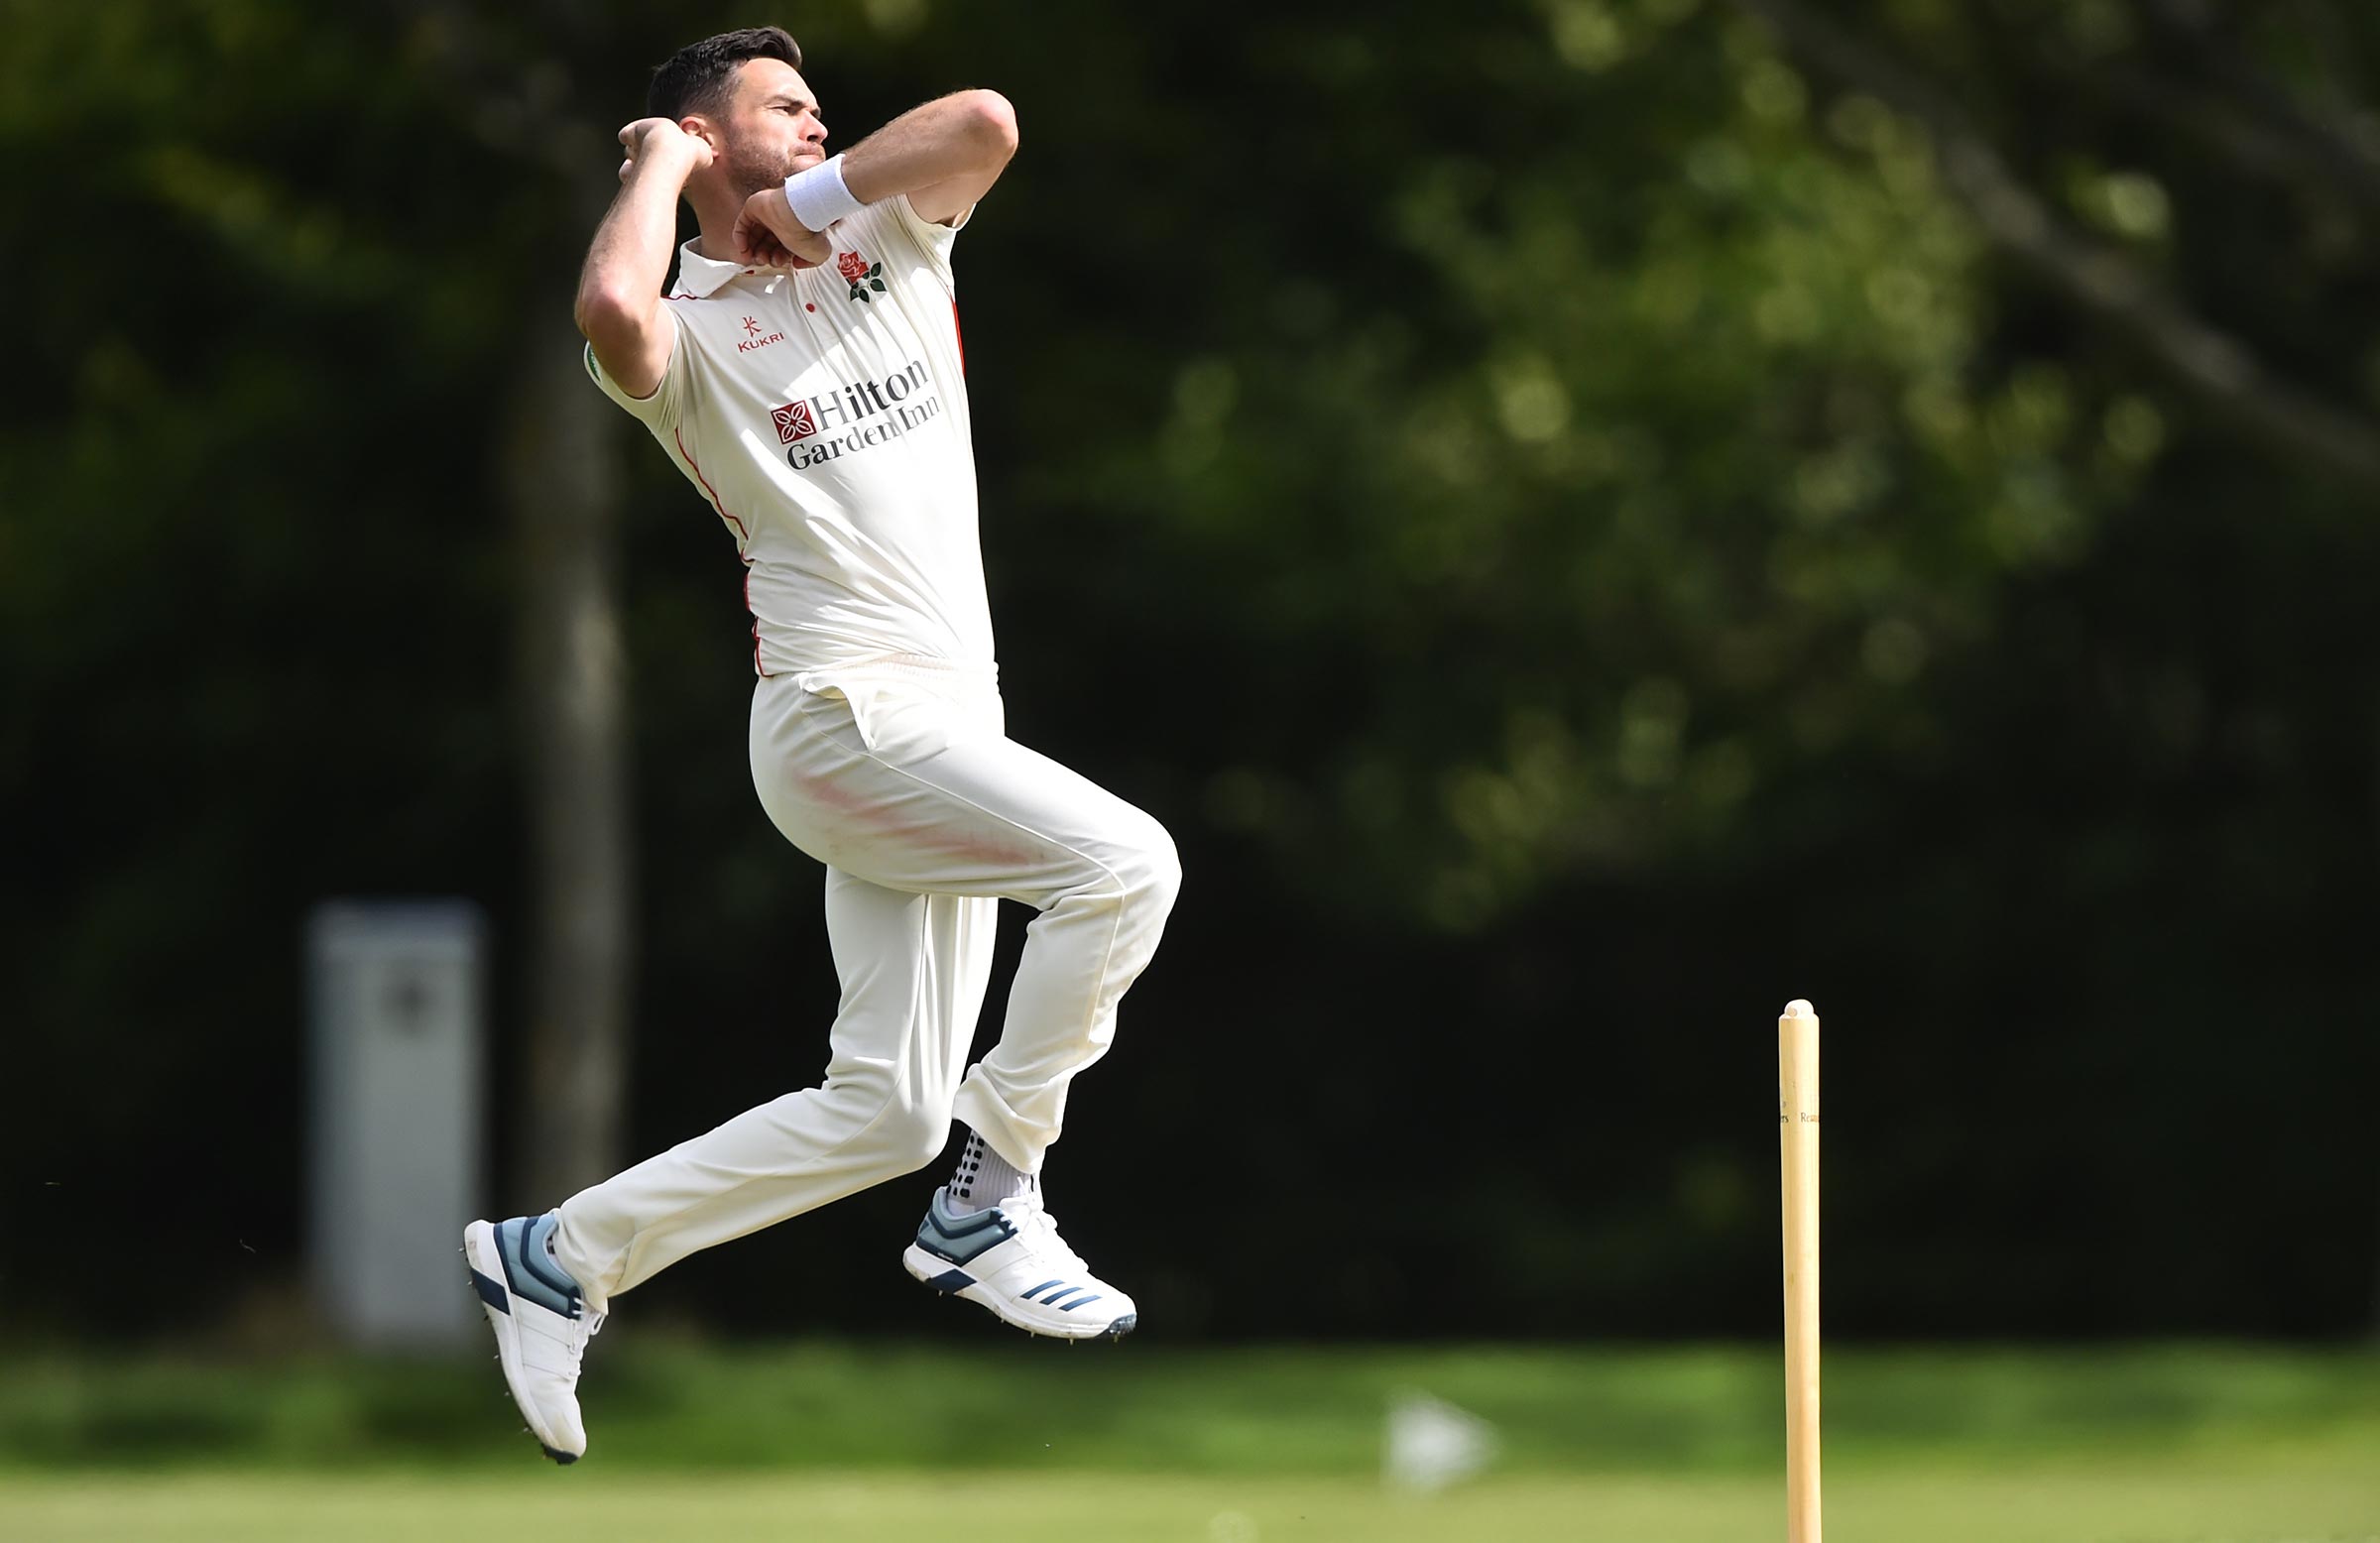 James Anderson's Ashes: From 'one-trick pony' to Australian tormentor